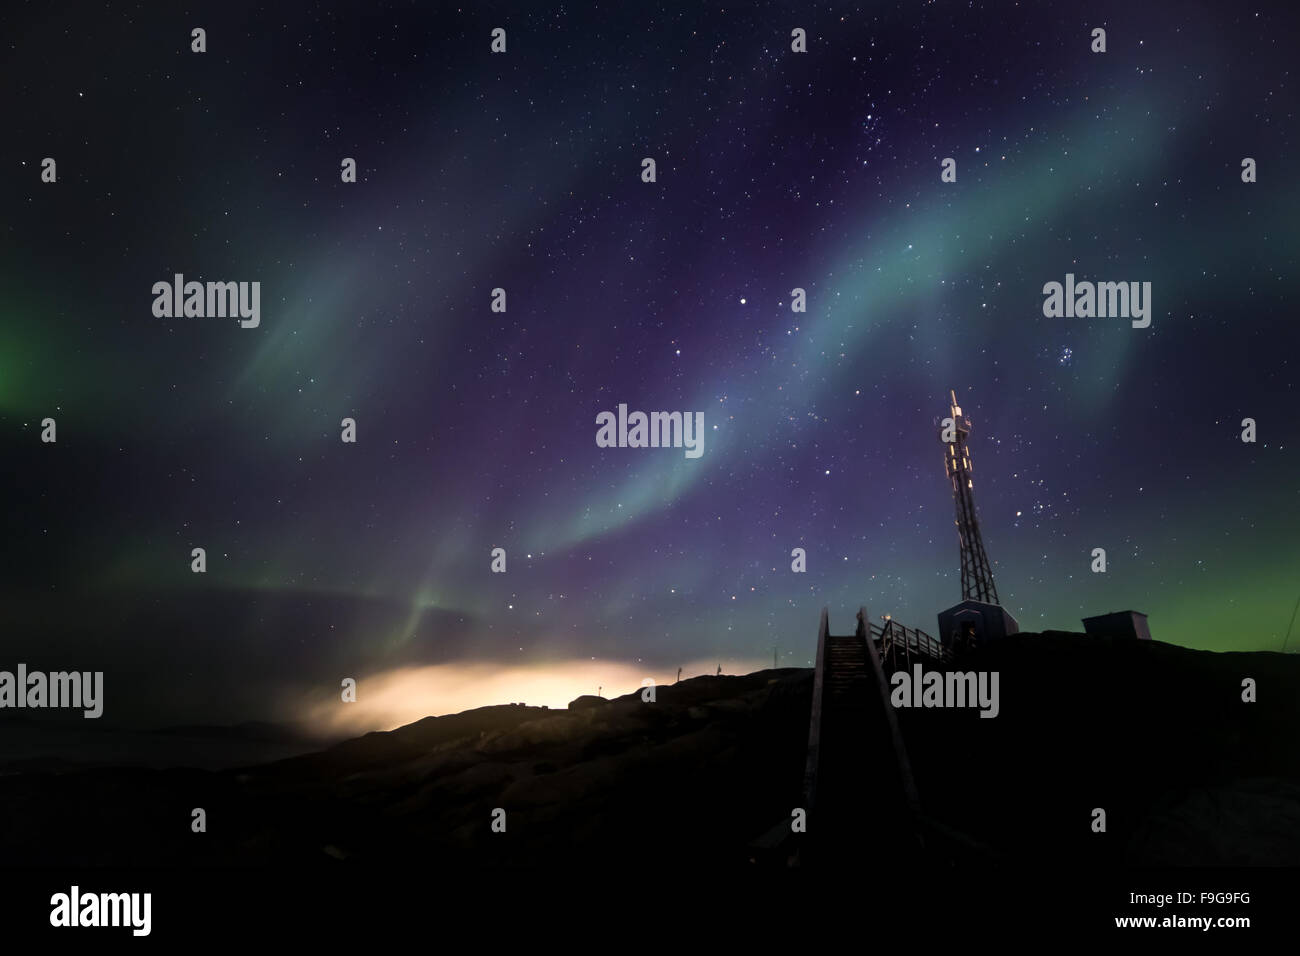 Green extensive Northern lights shining over the starlight sky and telecommunication tower, Nuuk, Greenland, October 2015 Stock Photo